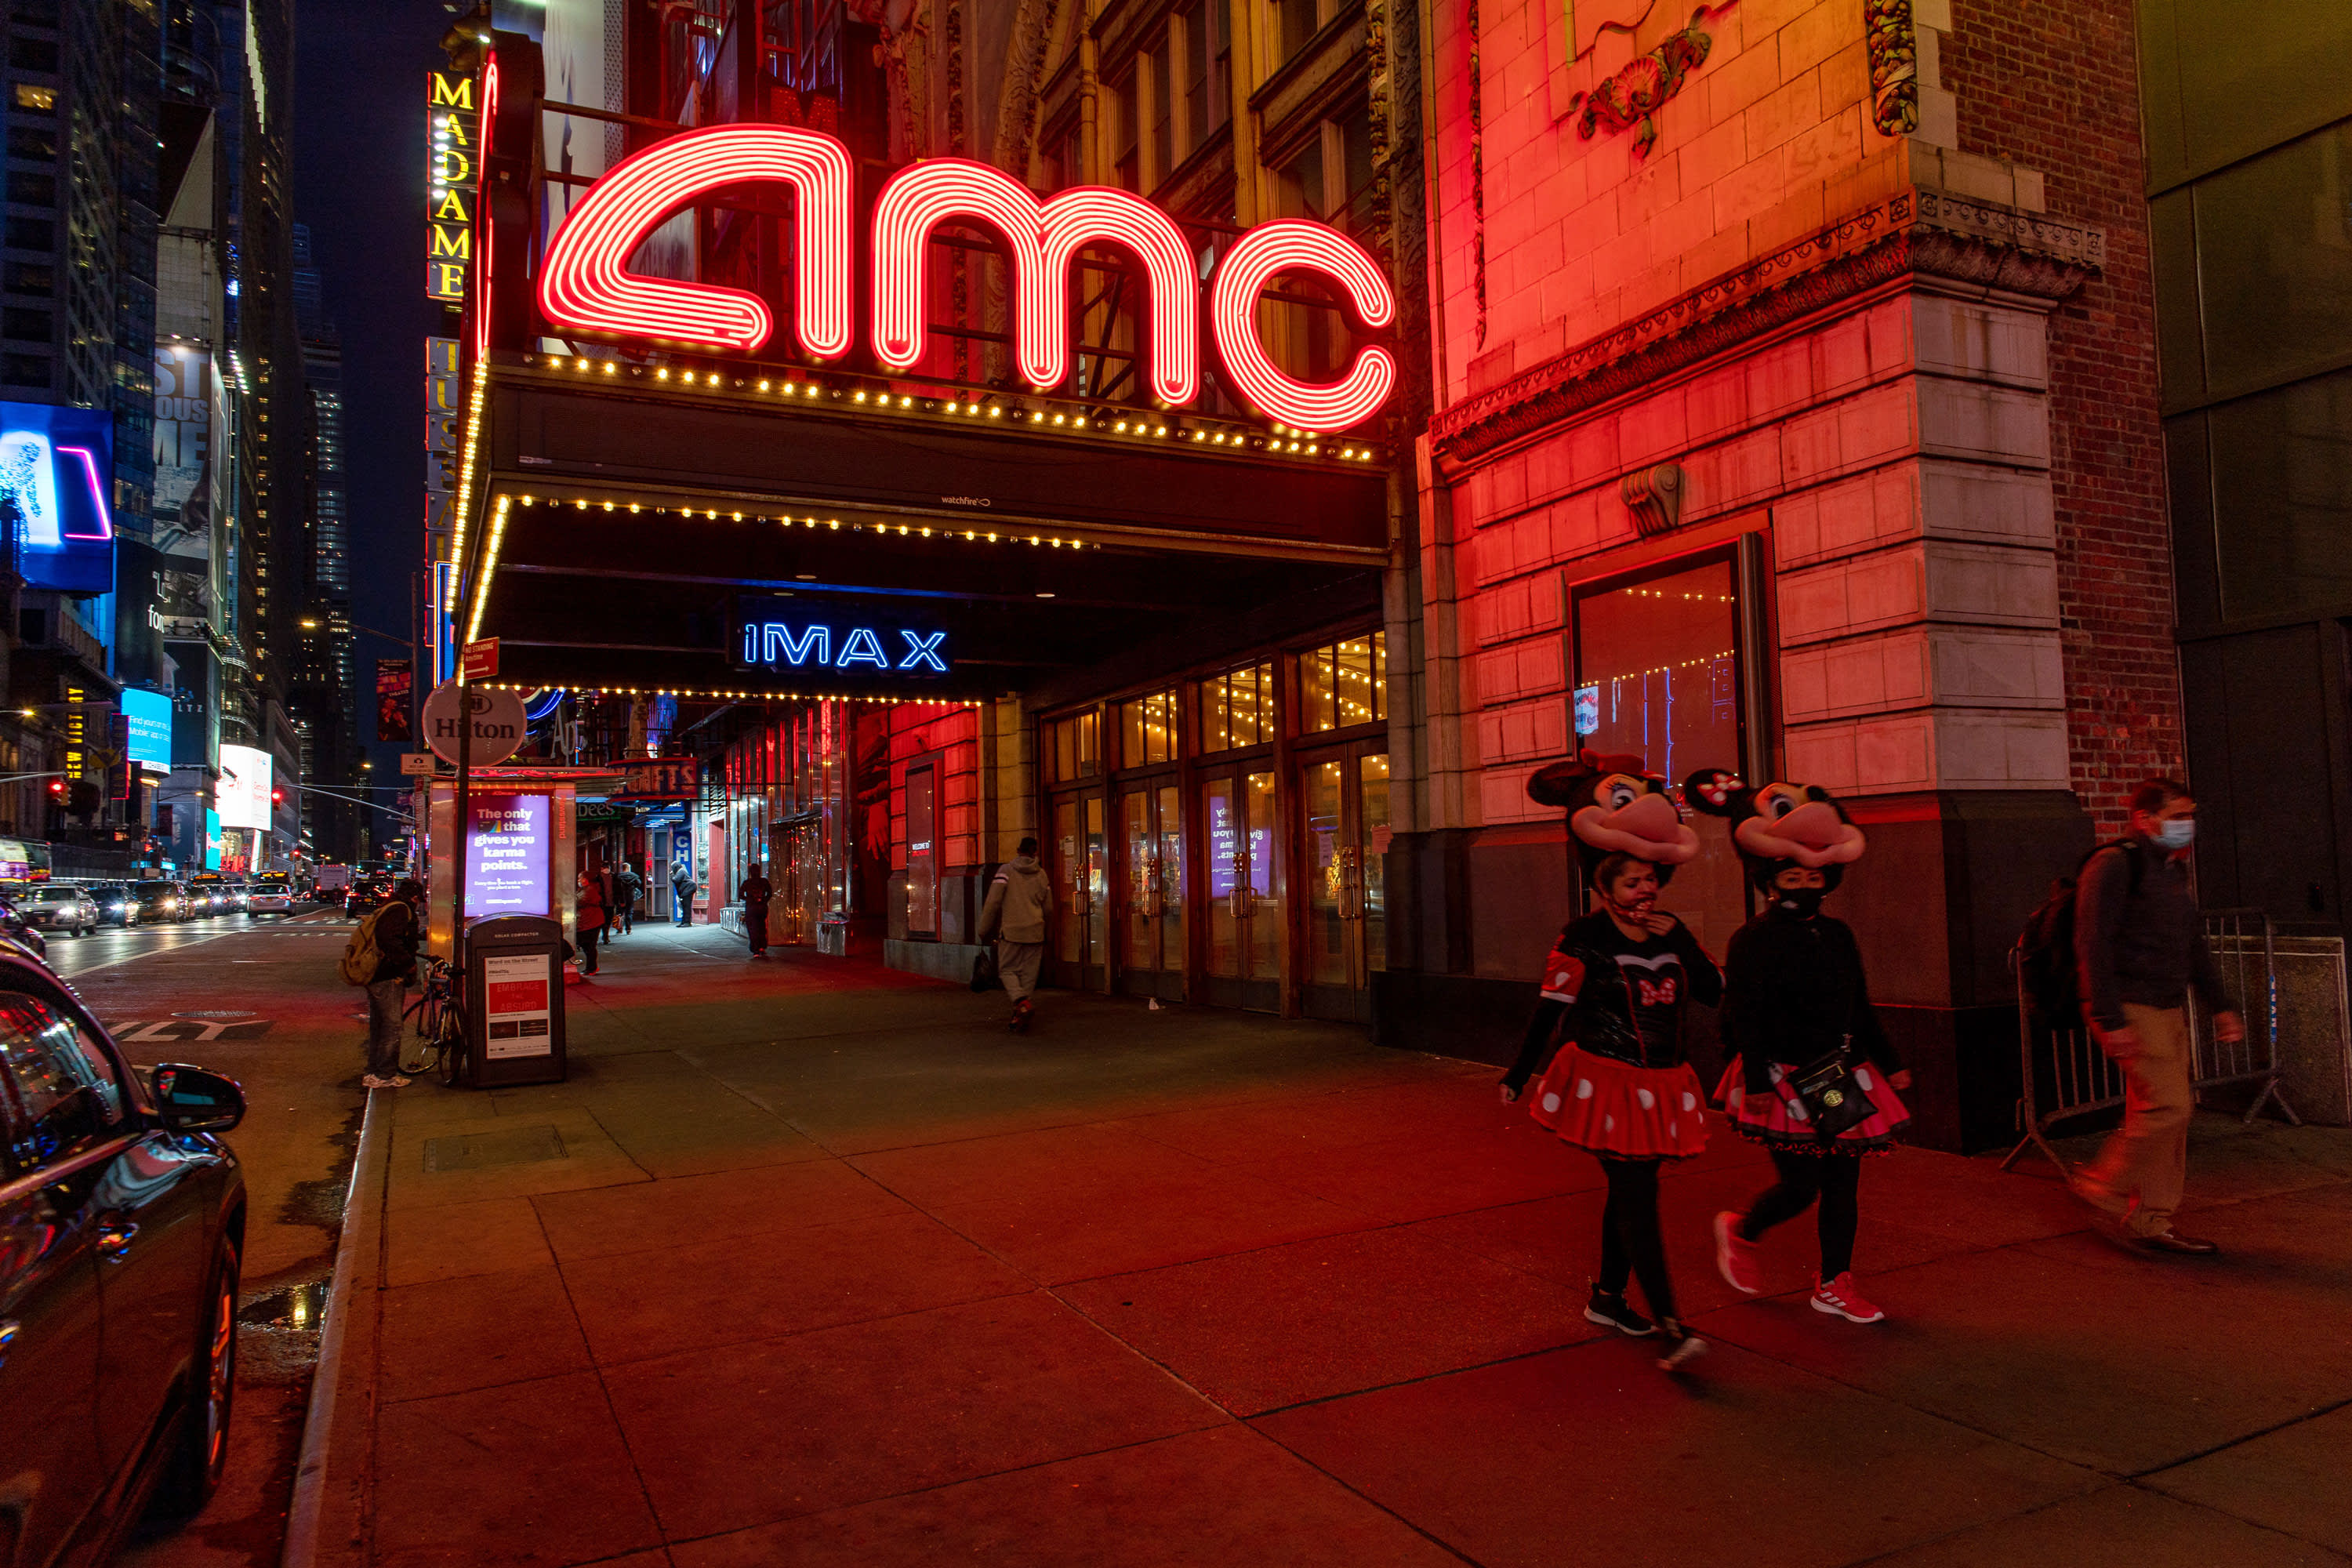 AMC shares triple as retail investors invest in GameStop hedge fund short-term spreads